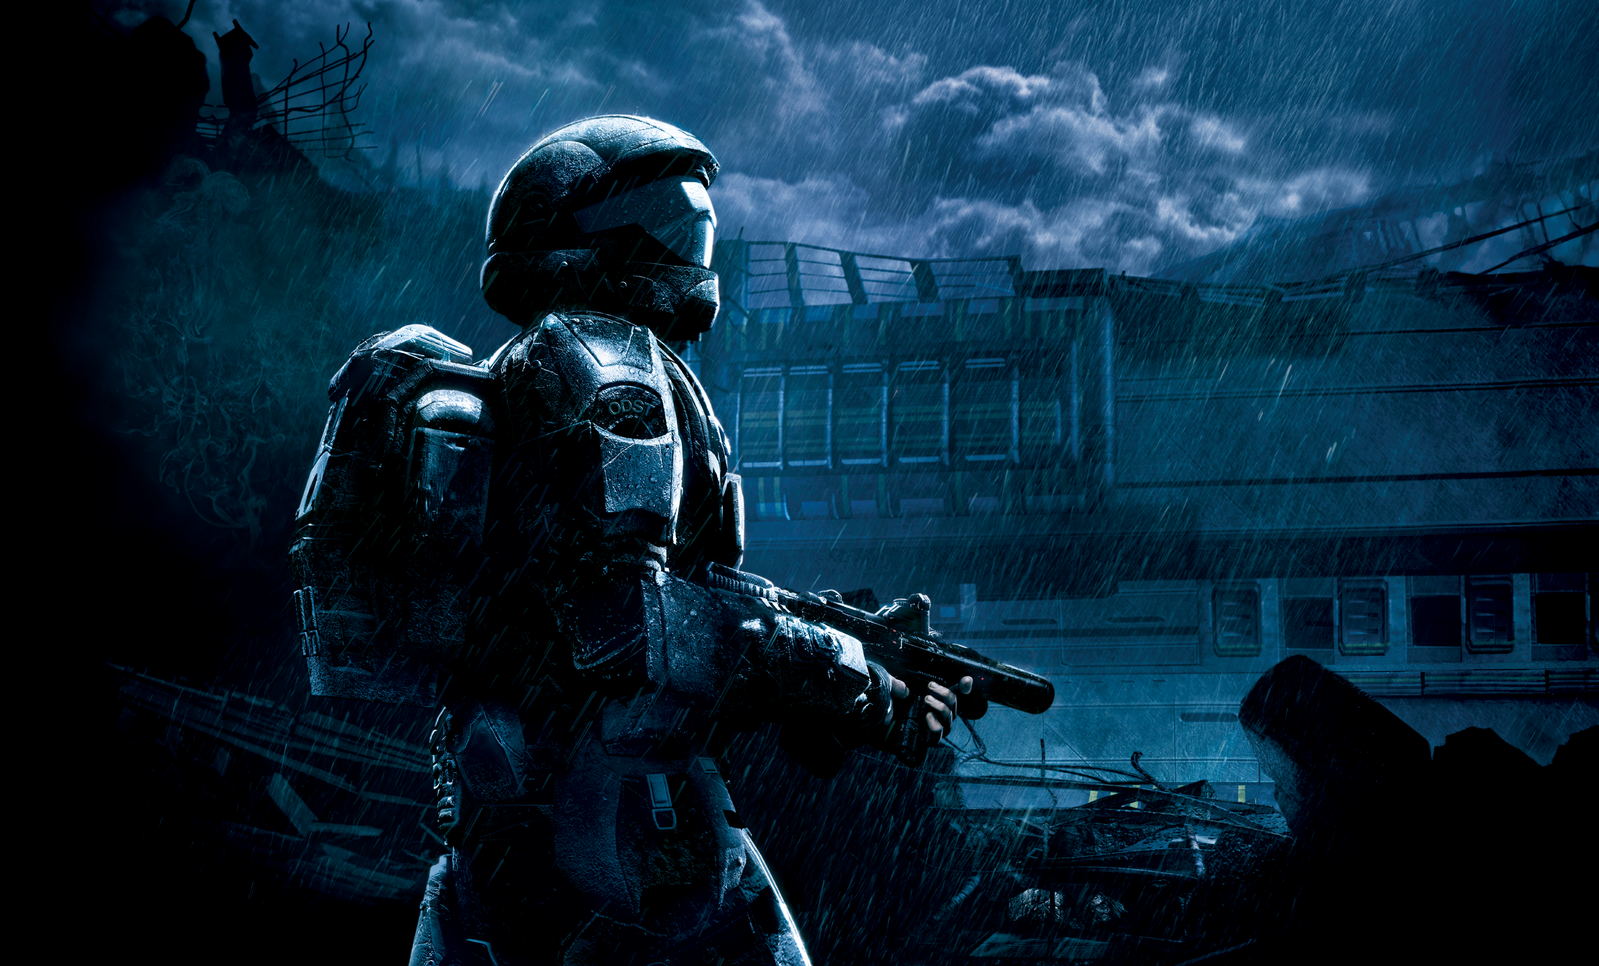 An orbital drop shock trooper in armor stands in the rain with a weapon, with dilapidated buildings and a ship in the somber background. The entire image is monotone blue.